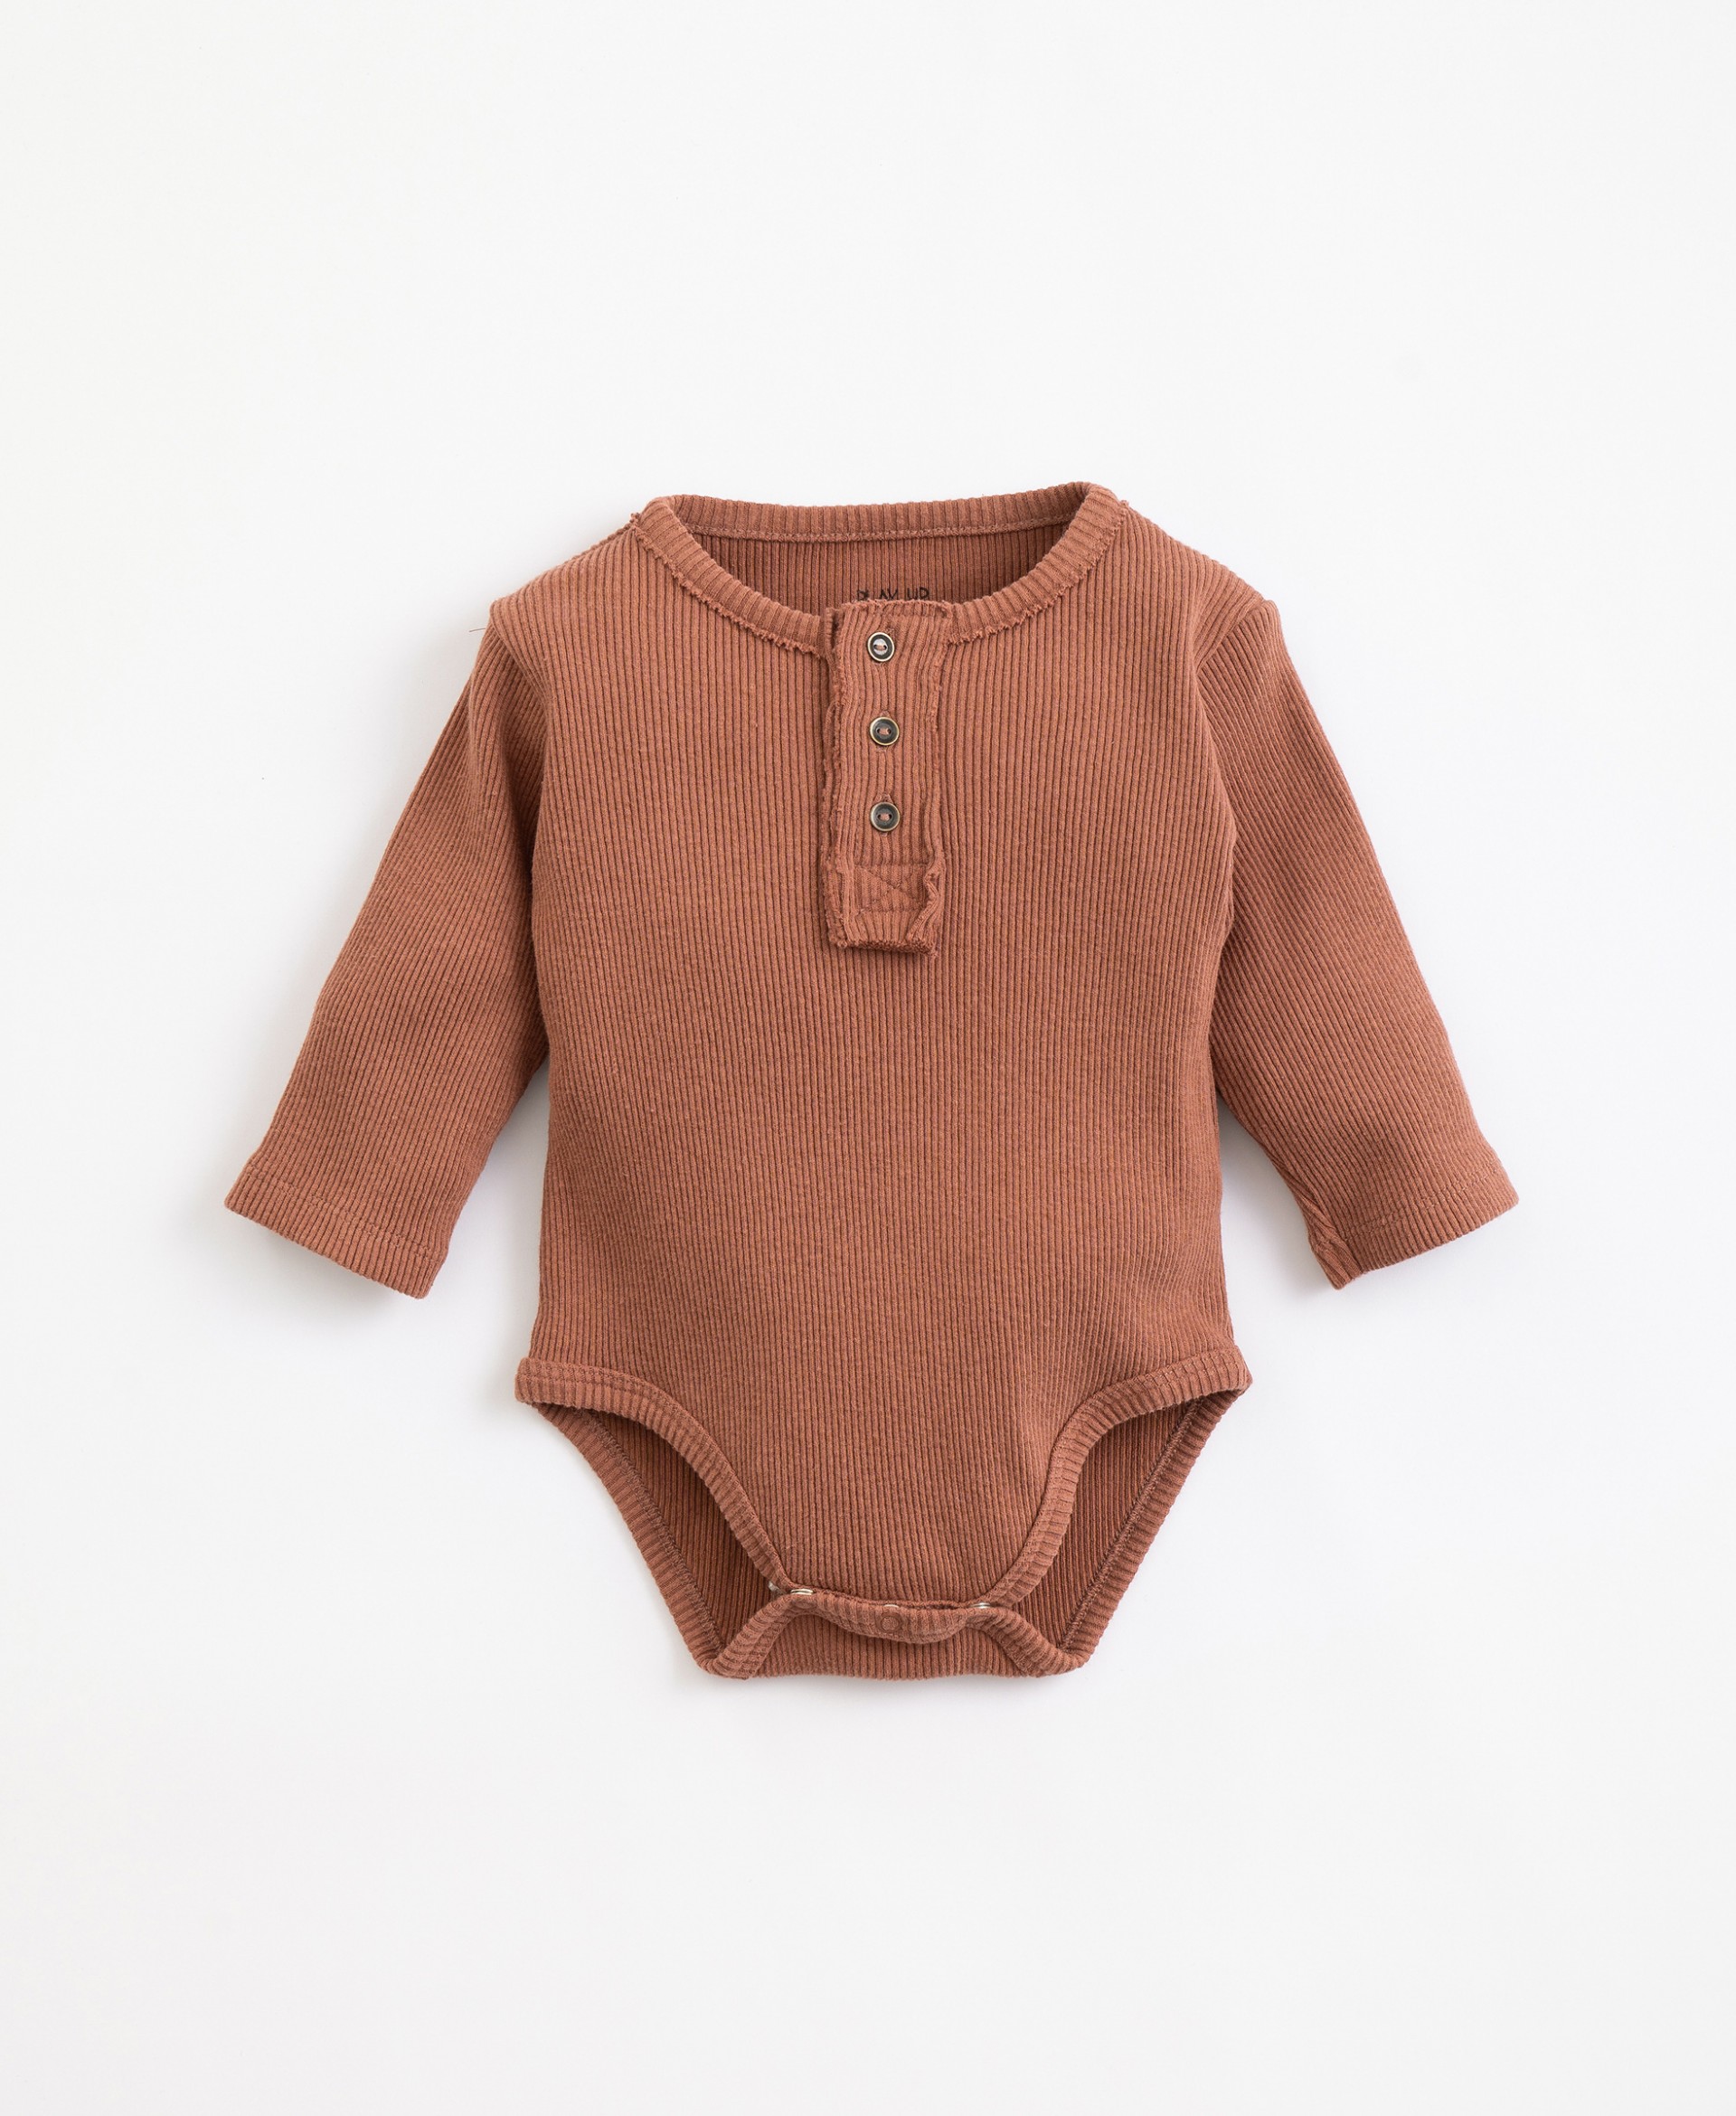 Organic cotton and recycled cotton baby boy bodysuit | PlayUp